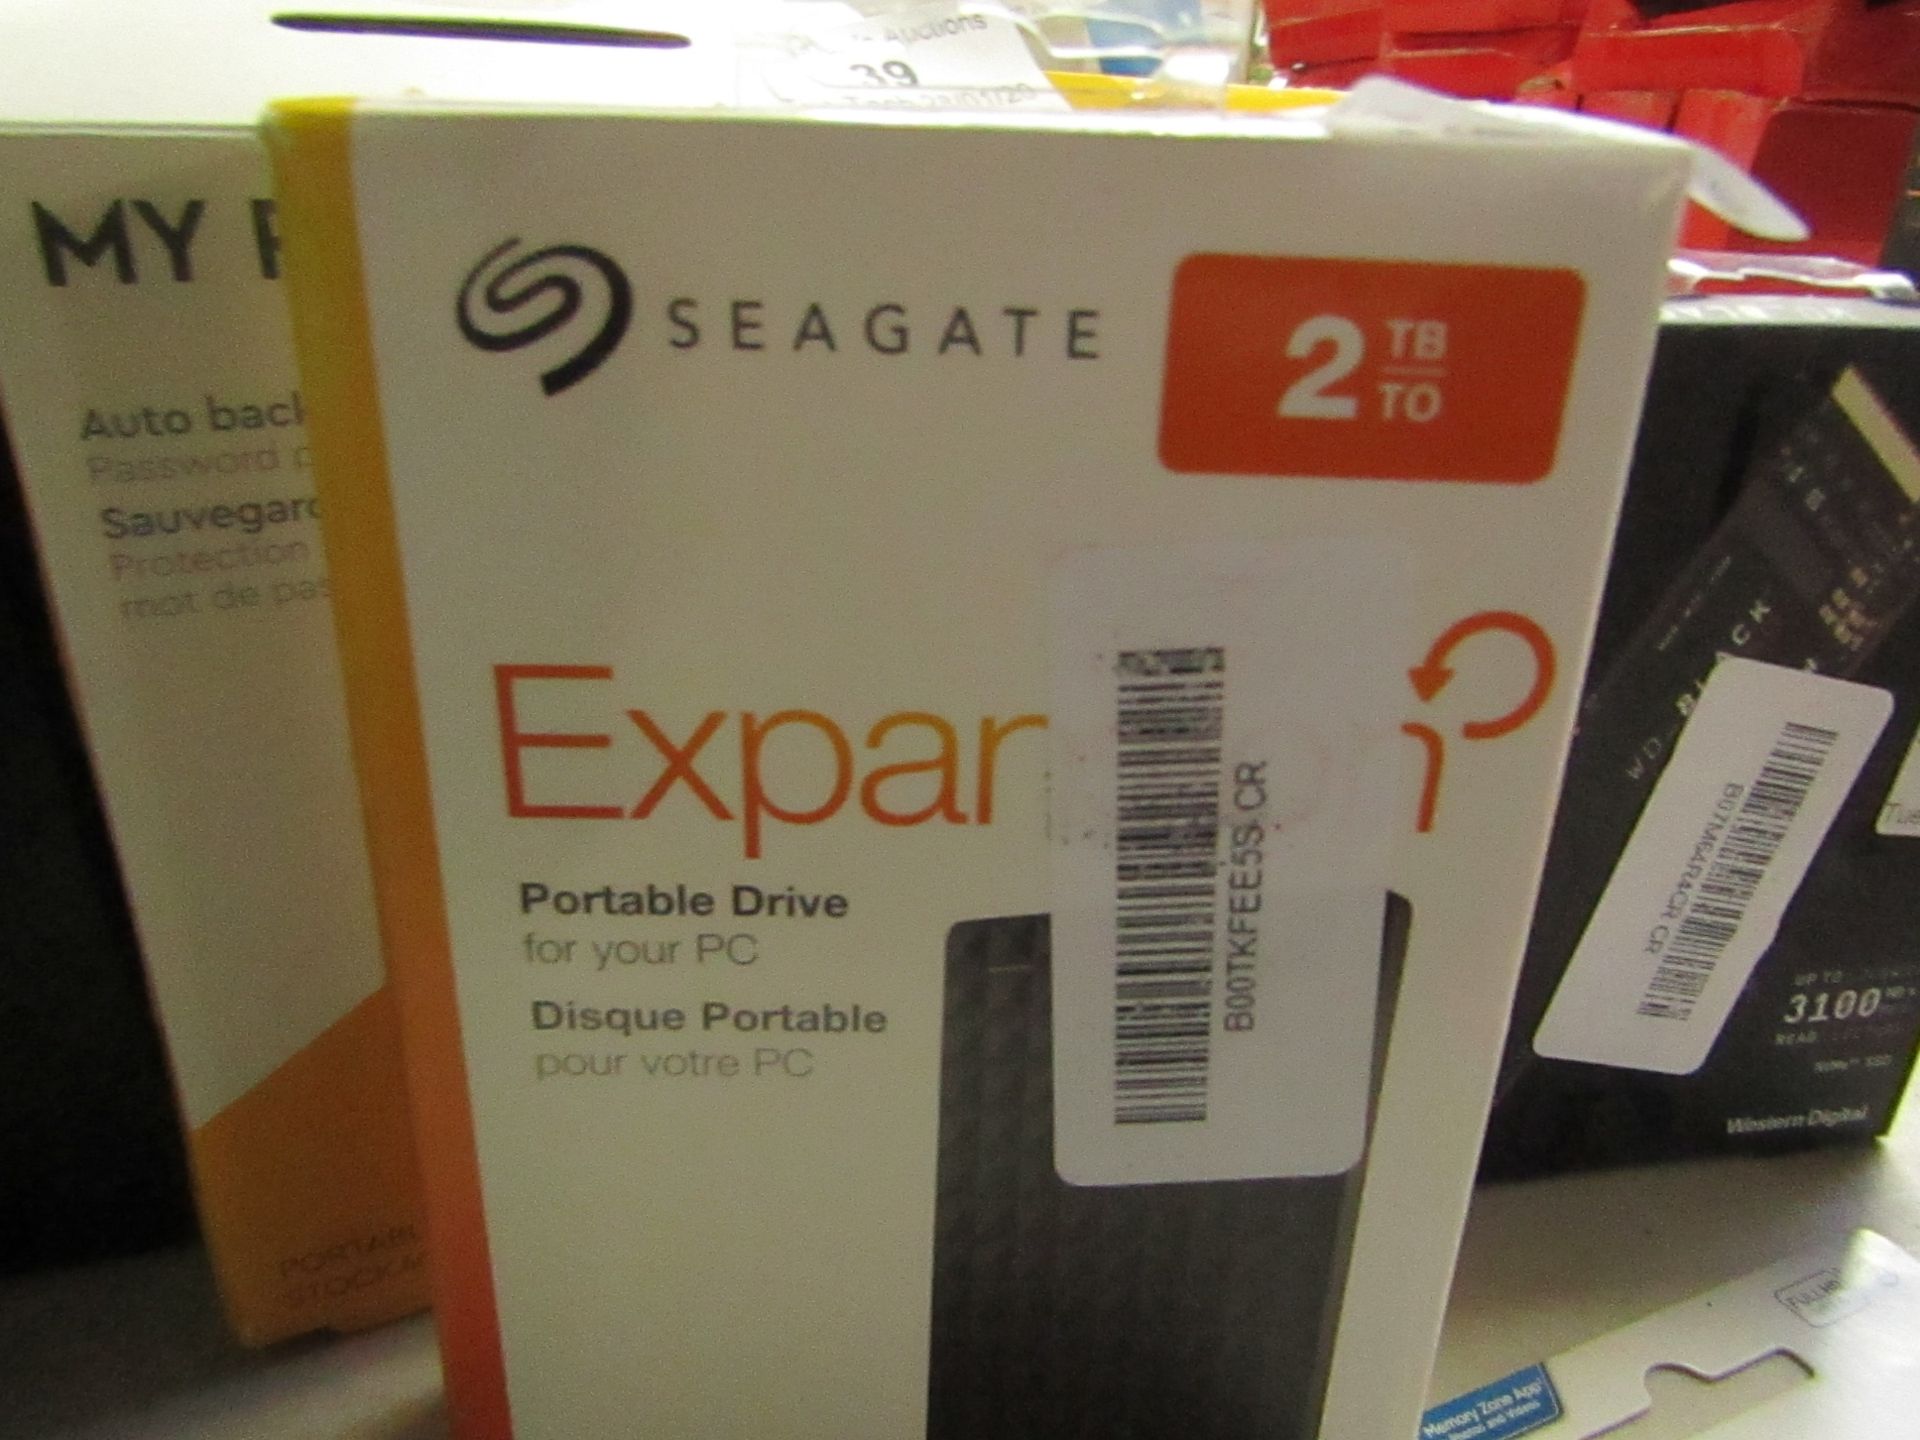 Seagate Expansion portable drive, 2TB, untested and boxed.